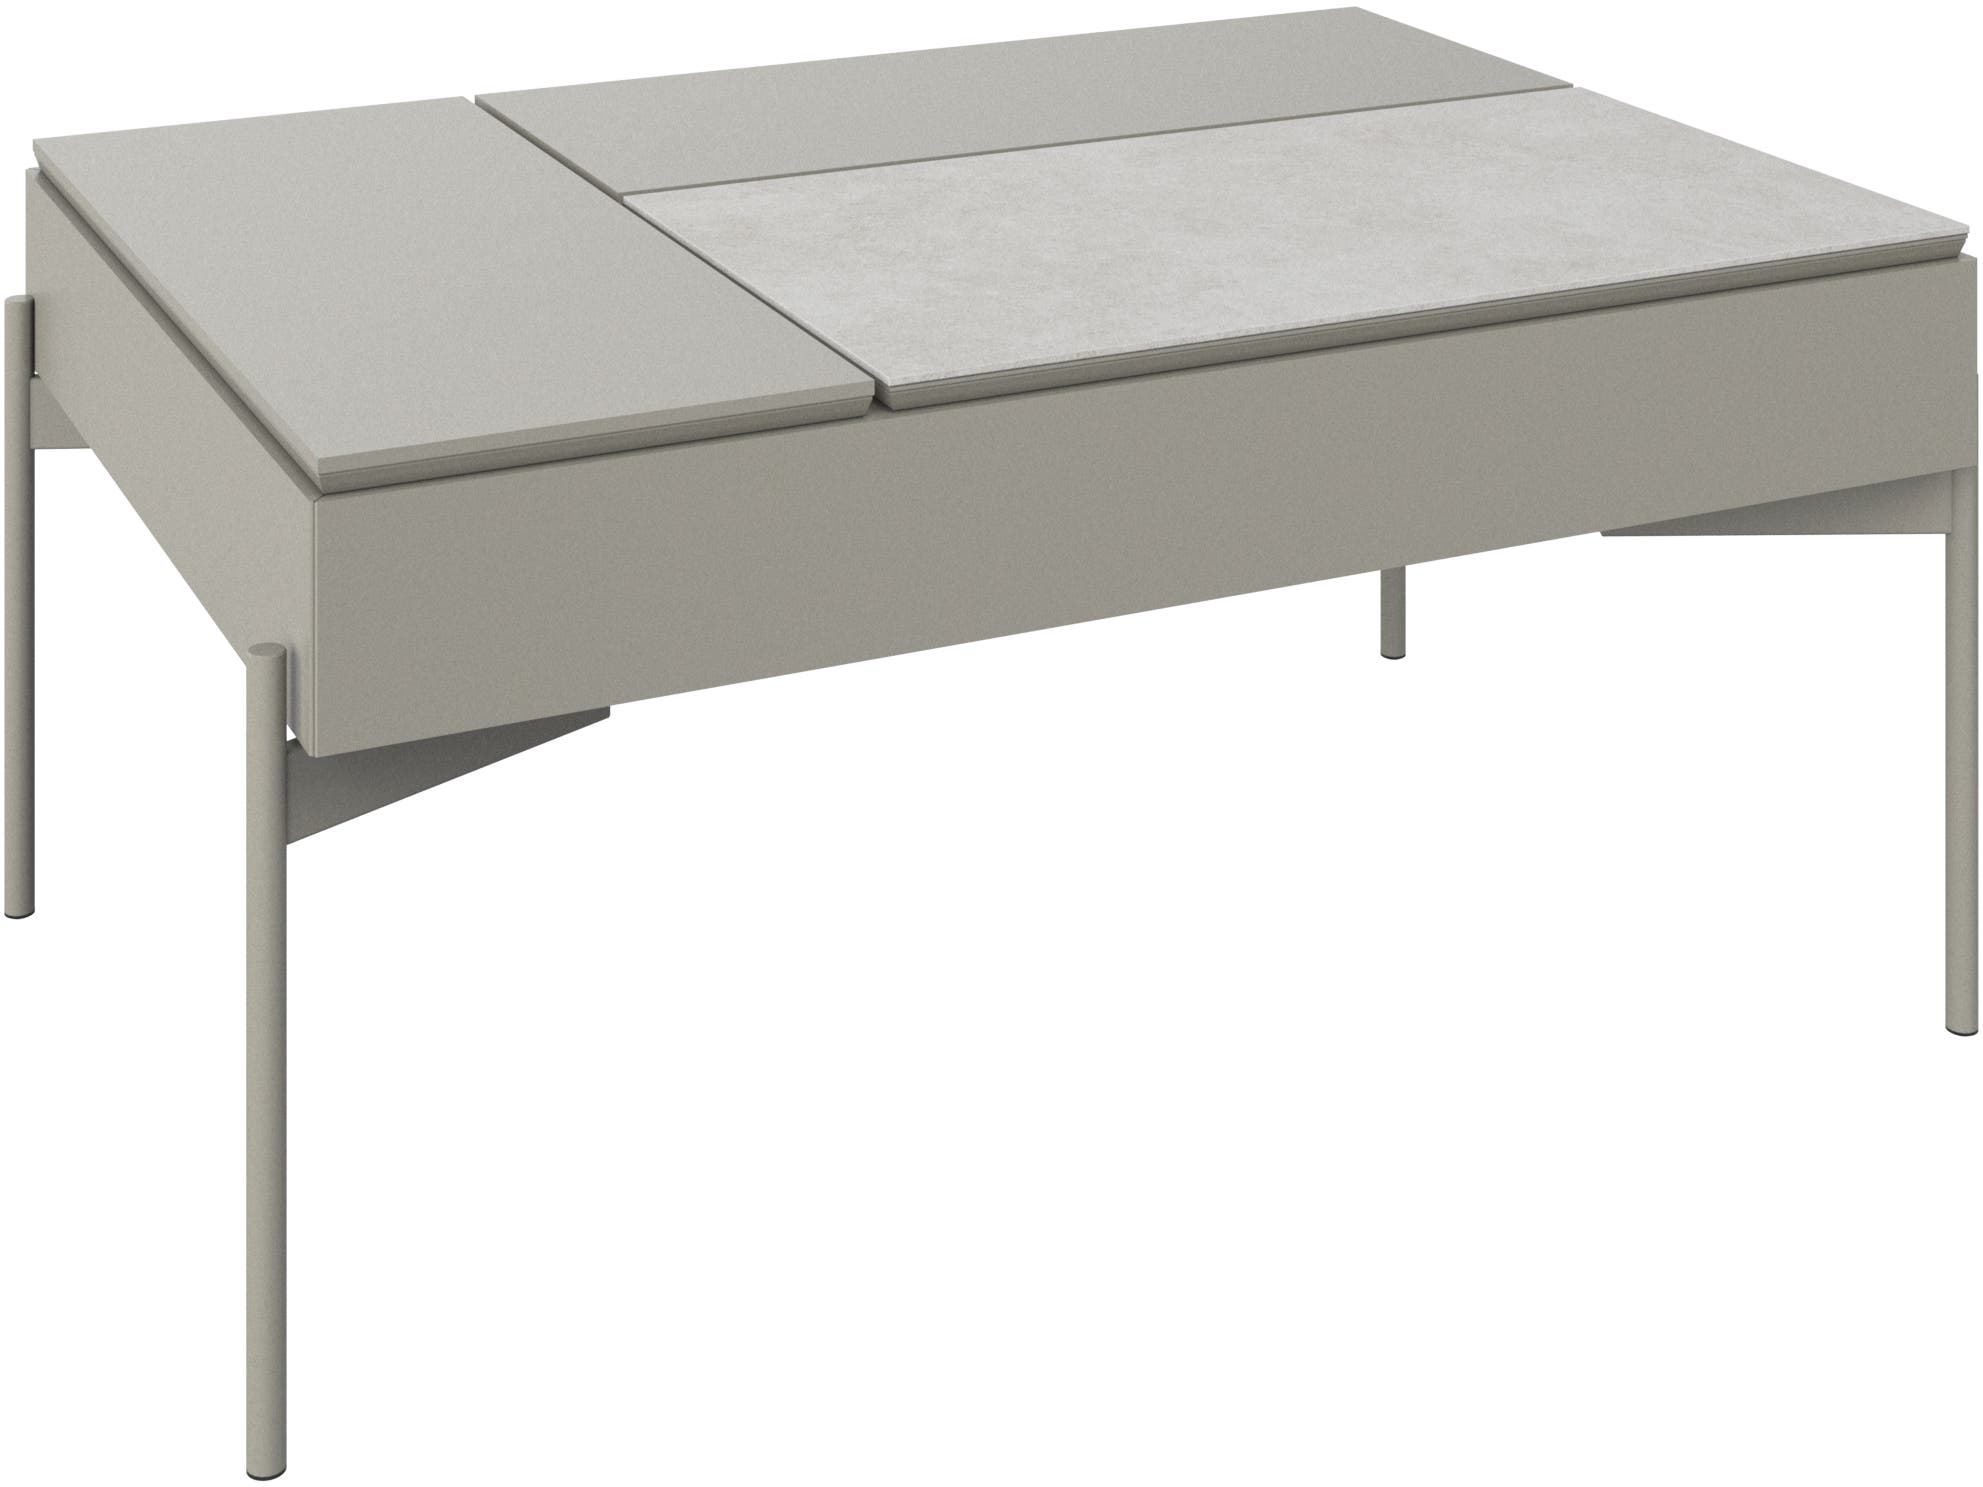 Chiva functional coffee table with storage | BoConcept